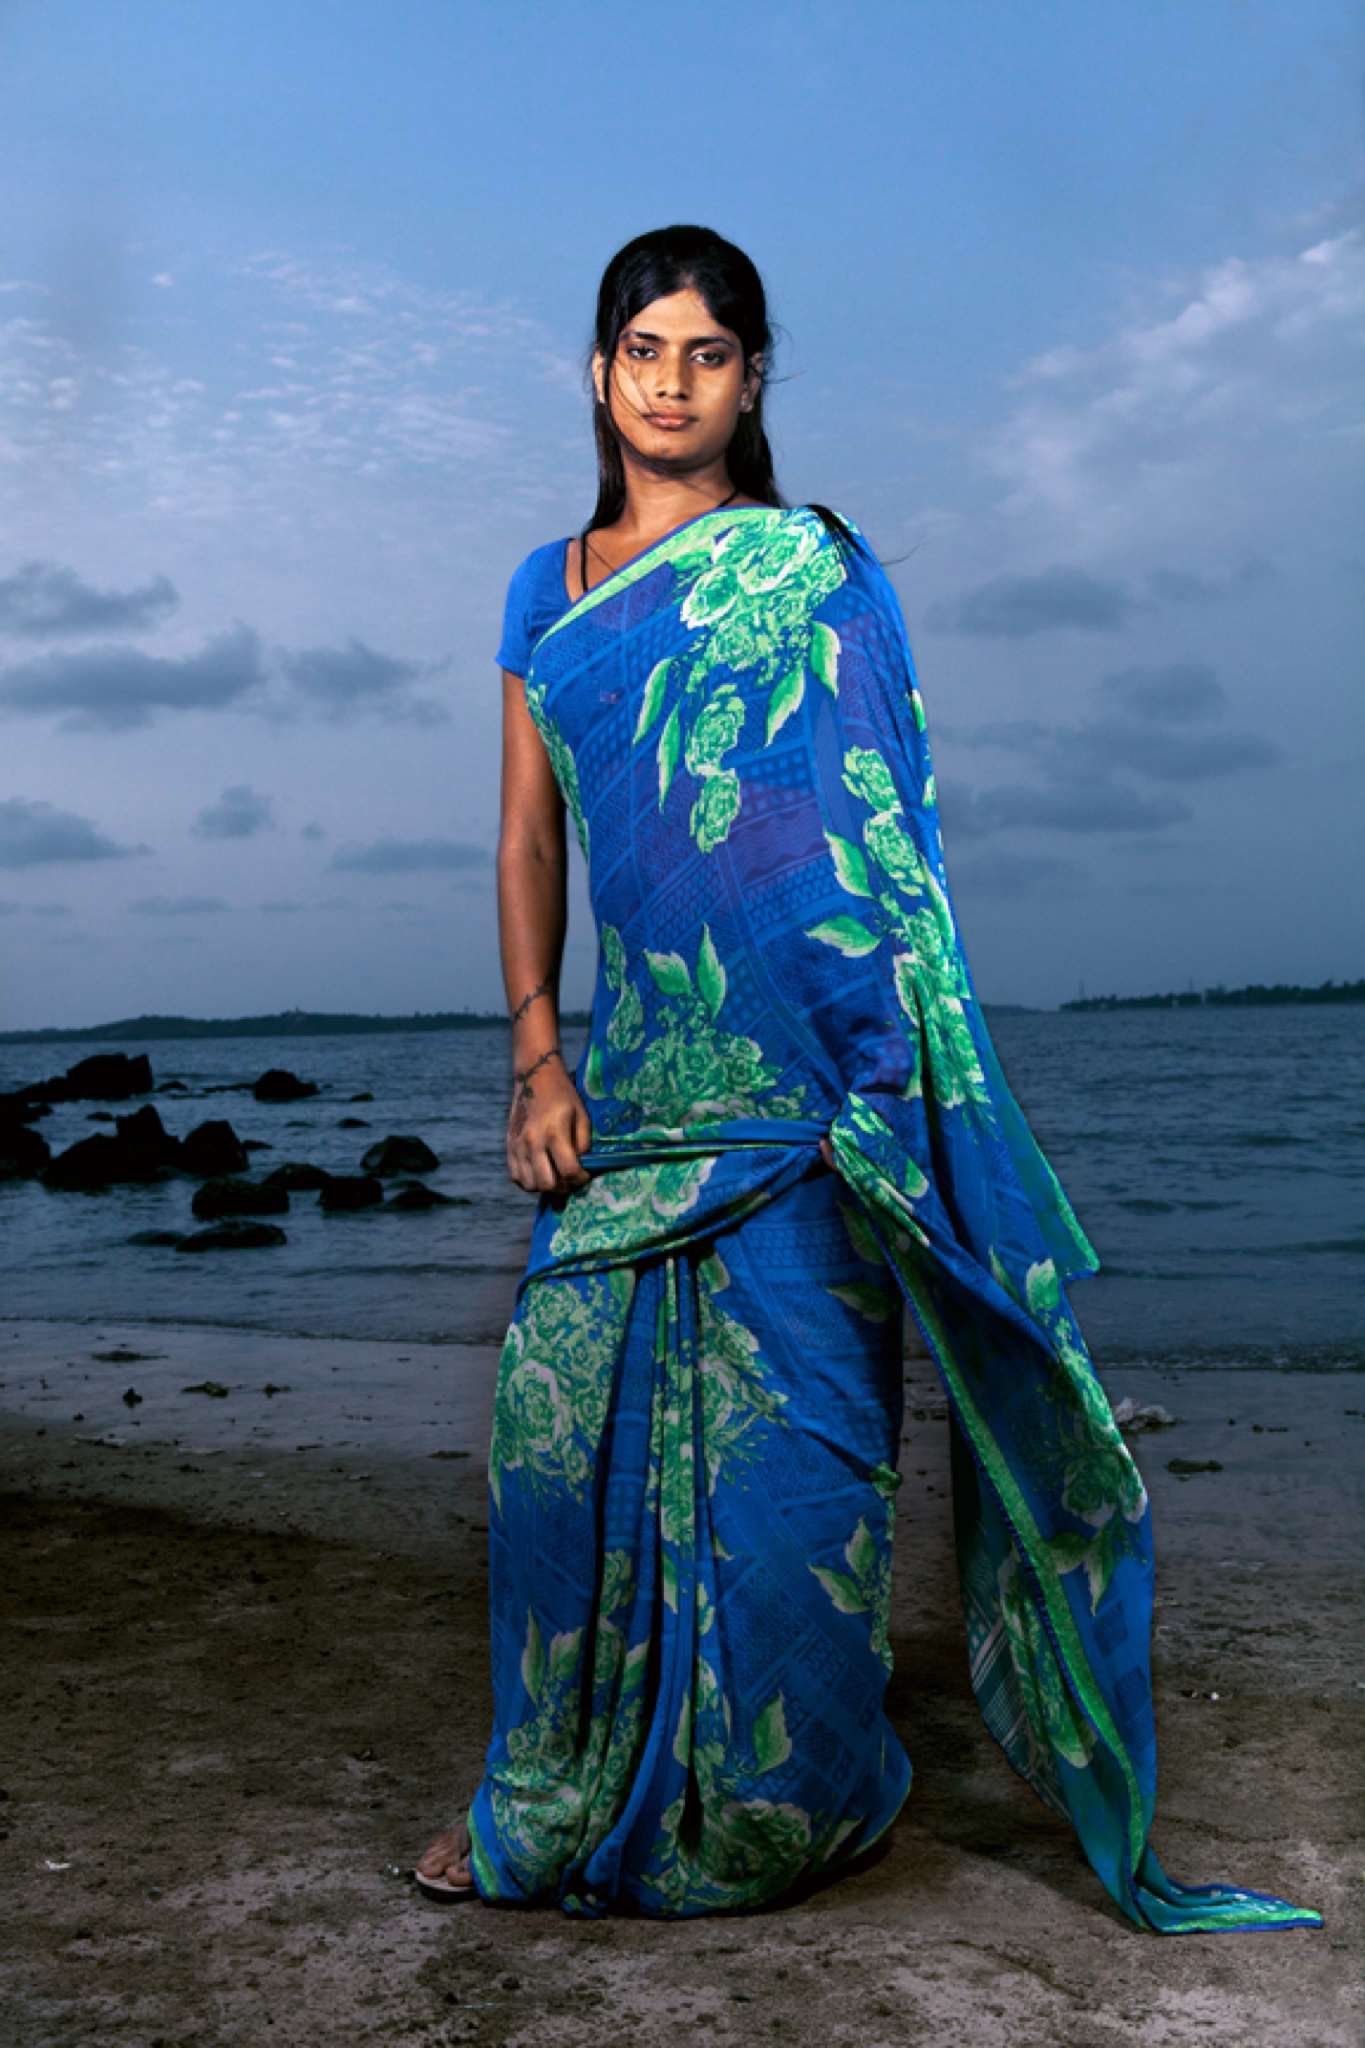 These Stunning Photographs Of The Third Gender Will Make ...